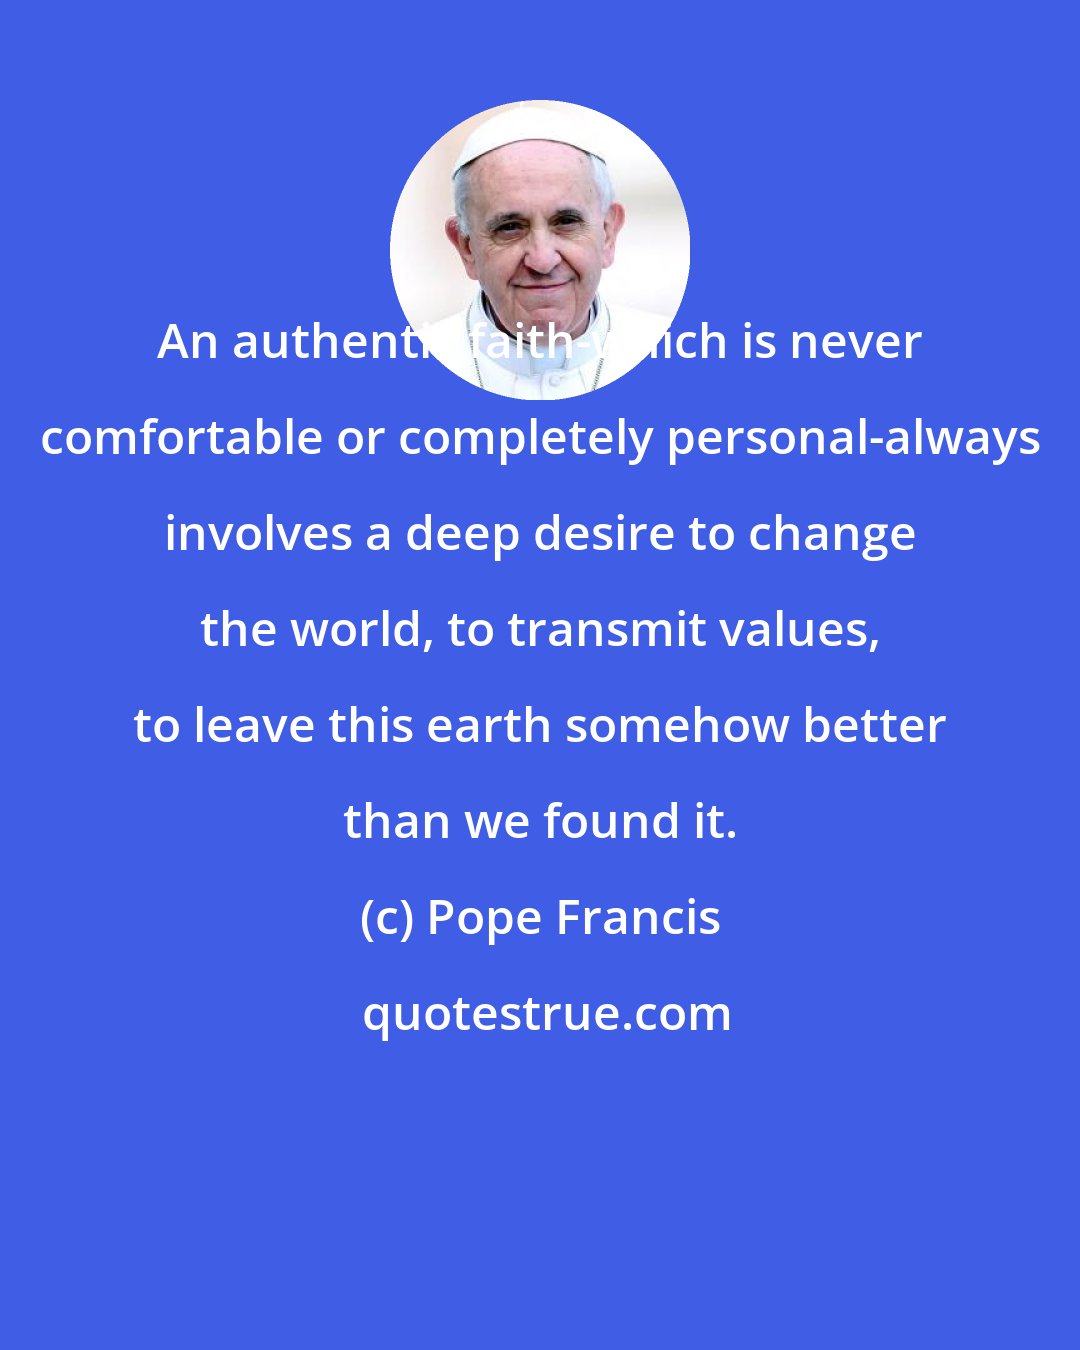 Pope Francis: An authentic faith-which is never comfortable or completely personal-always involves a deep desire to change the world, to transmit values, to leave this earth somehow better than we found it.